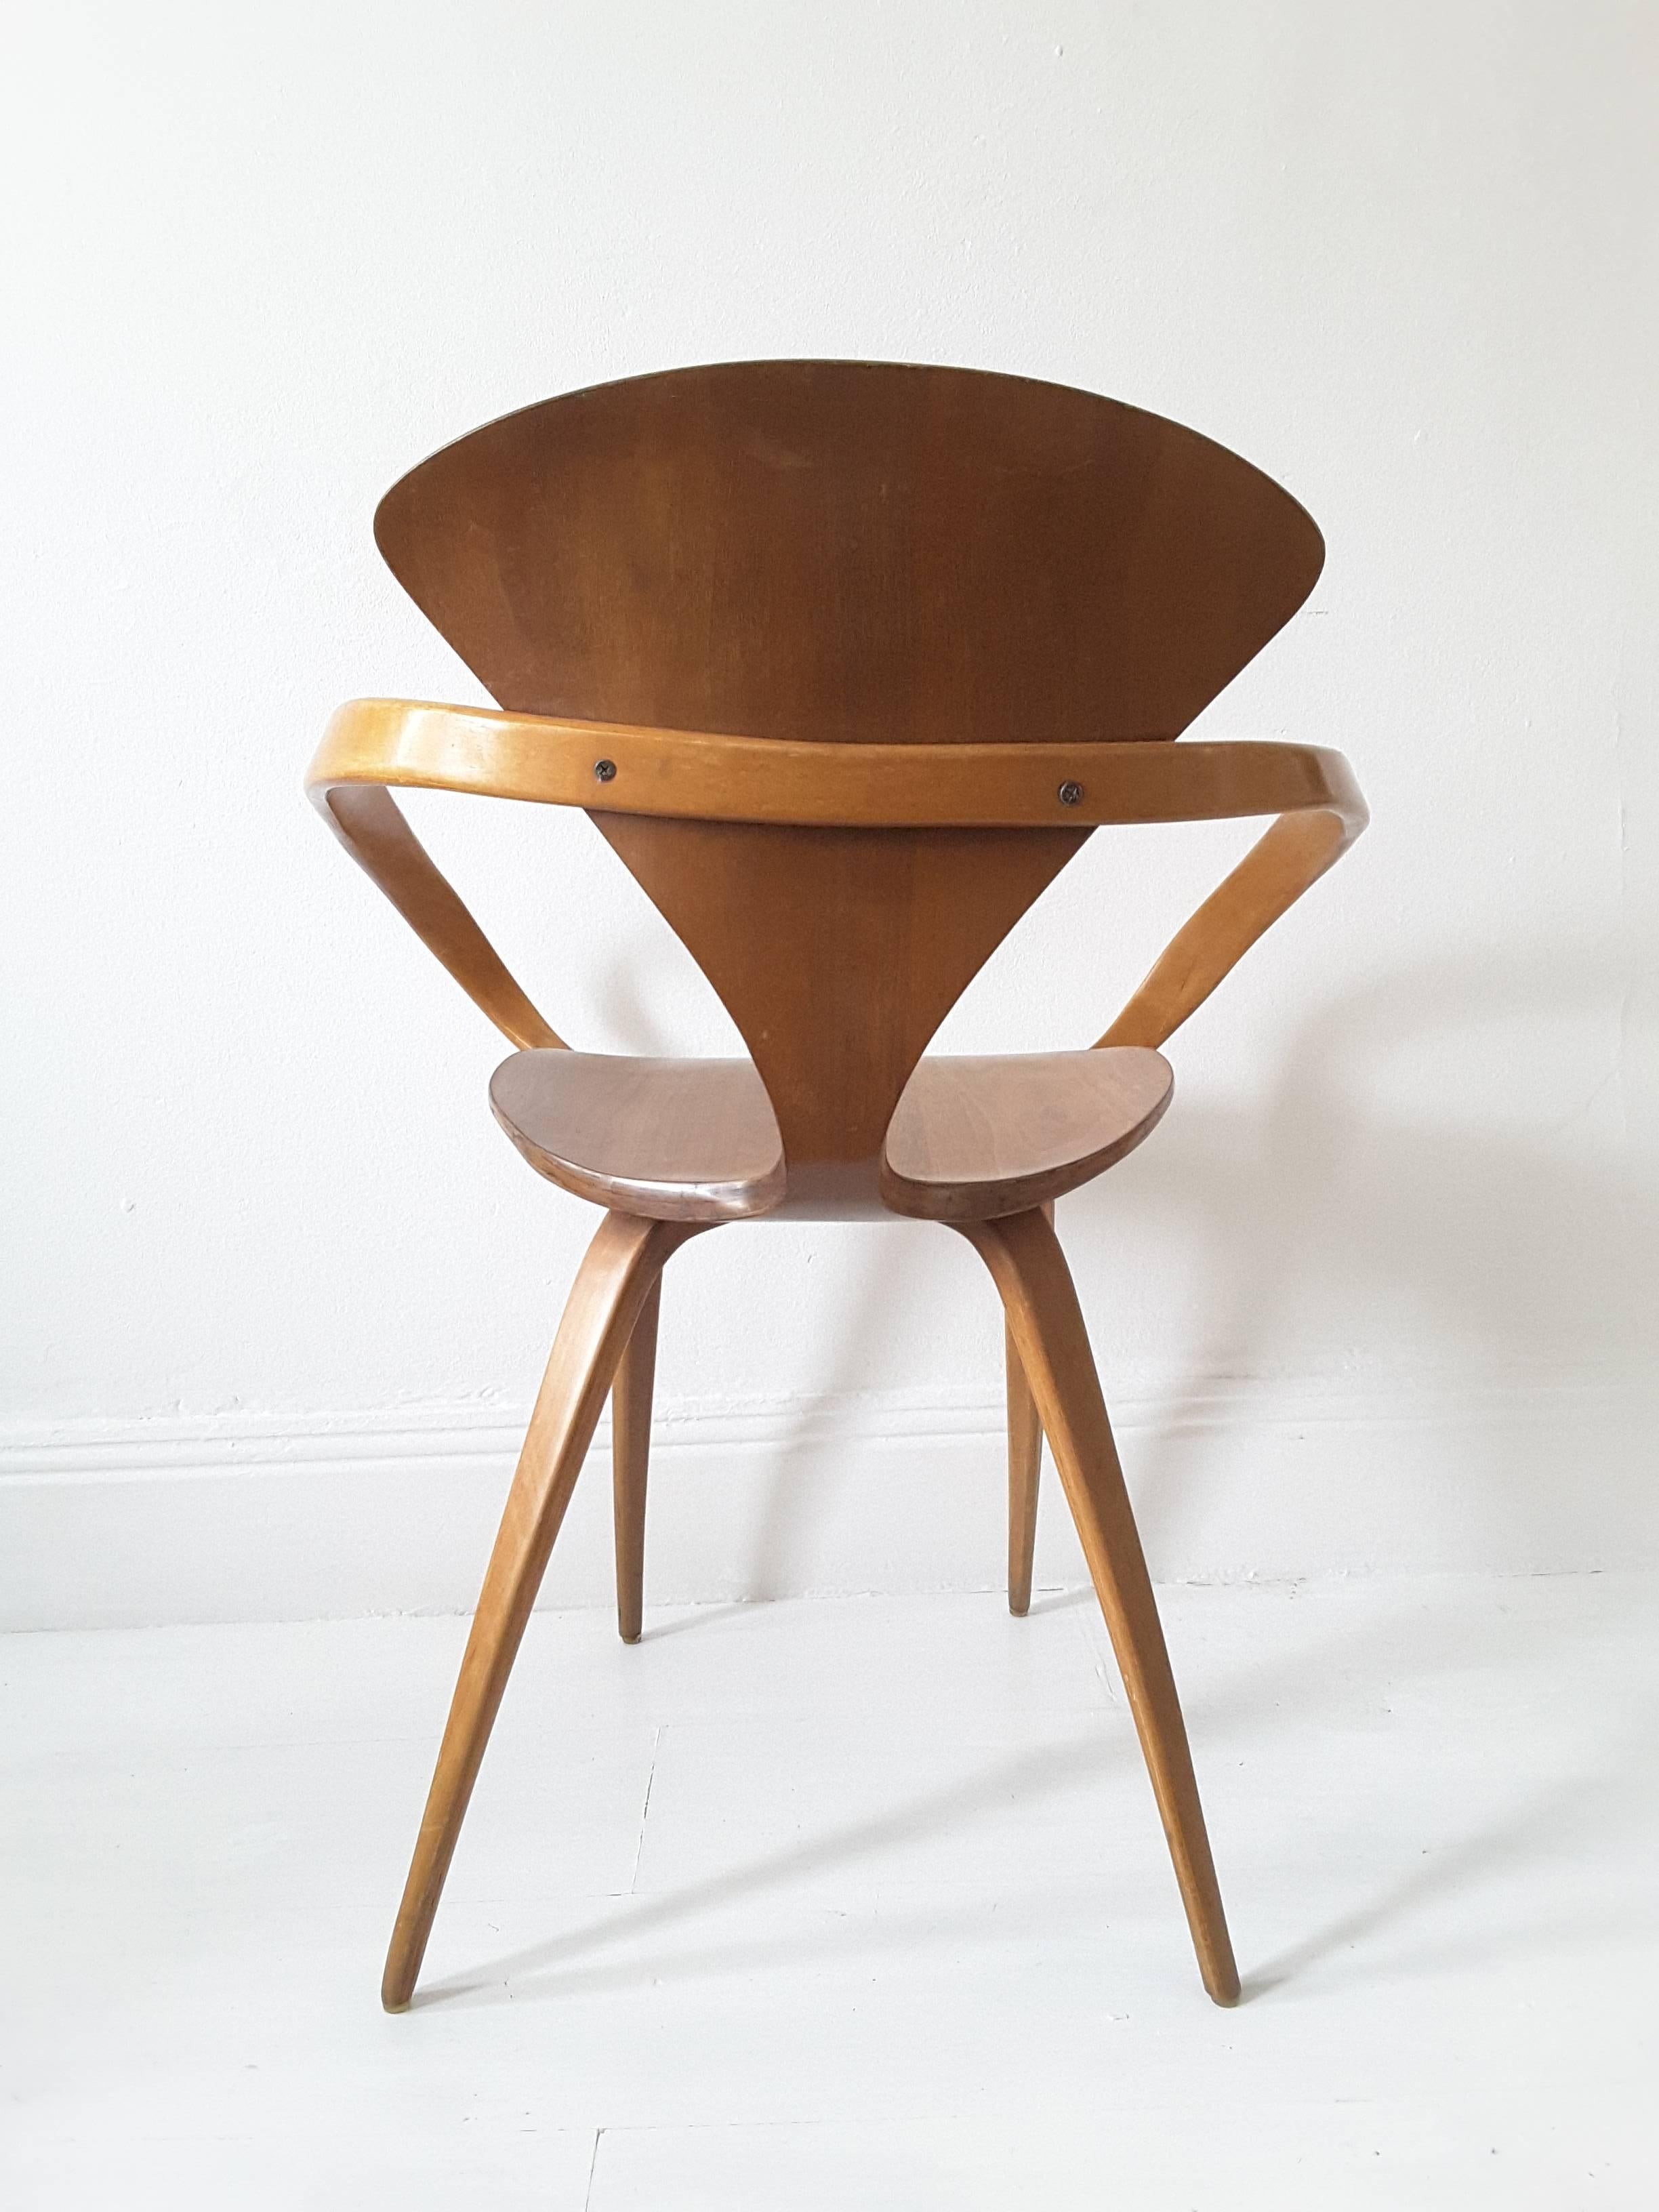 Central American Mid-Century Bent Plywood Cherner Chair Designed by Norman Cherner for Plycraft